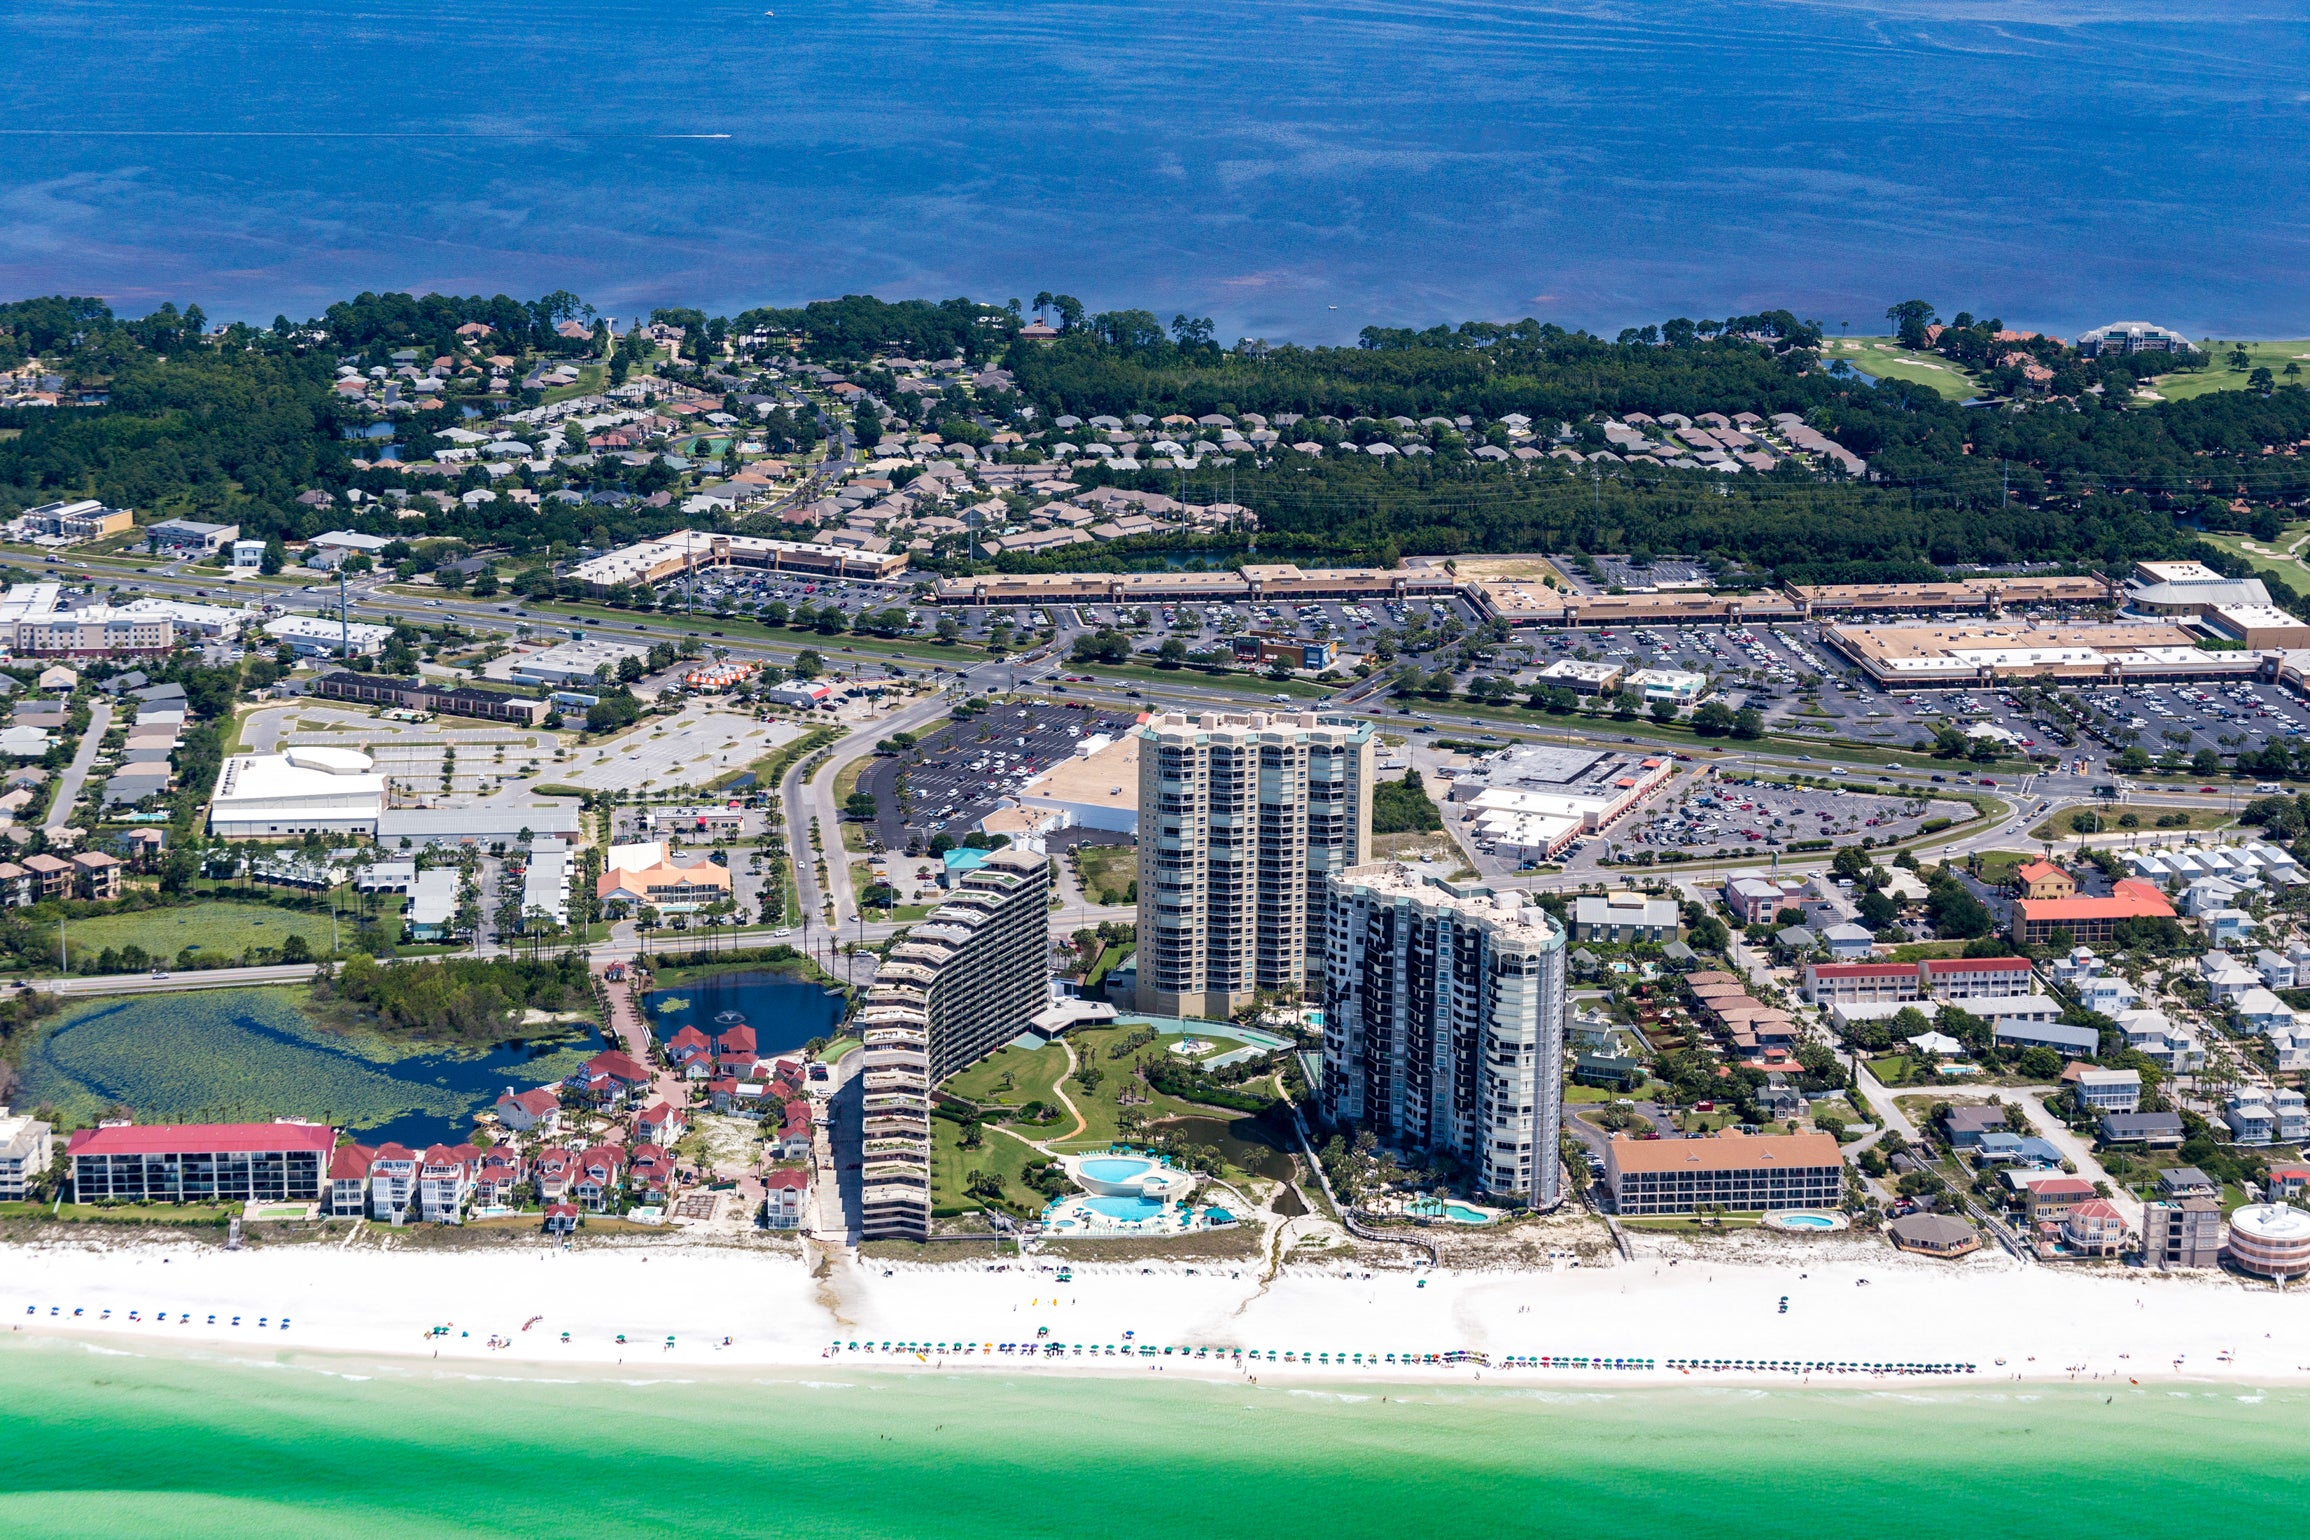 Another Aerial of the Edgewater Resort